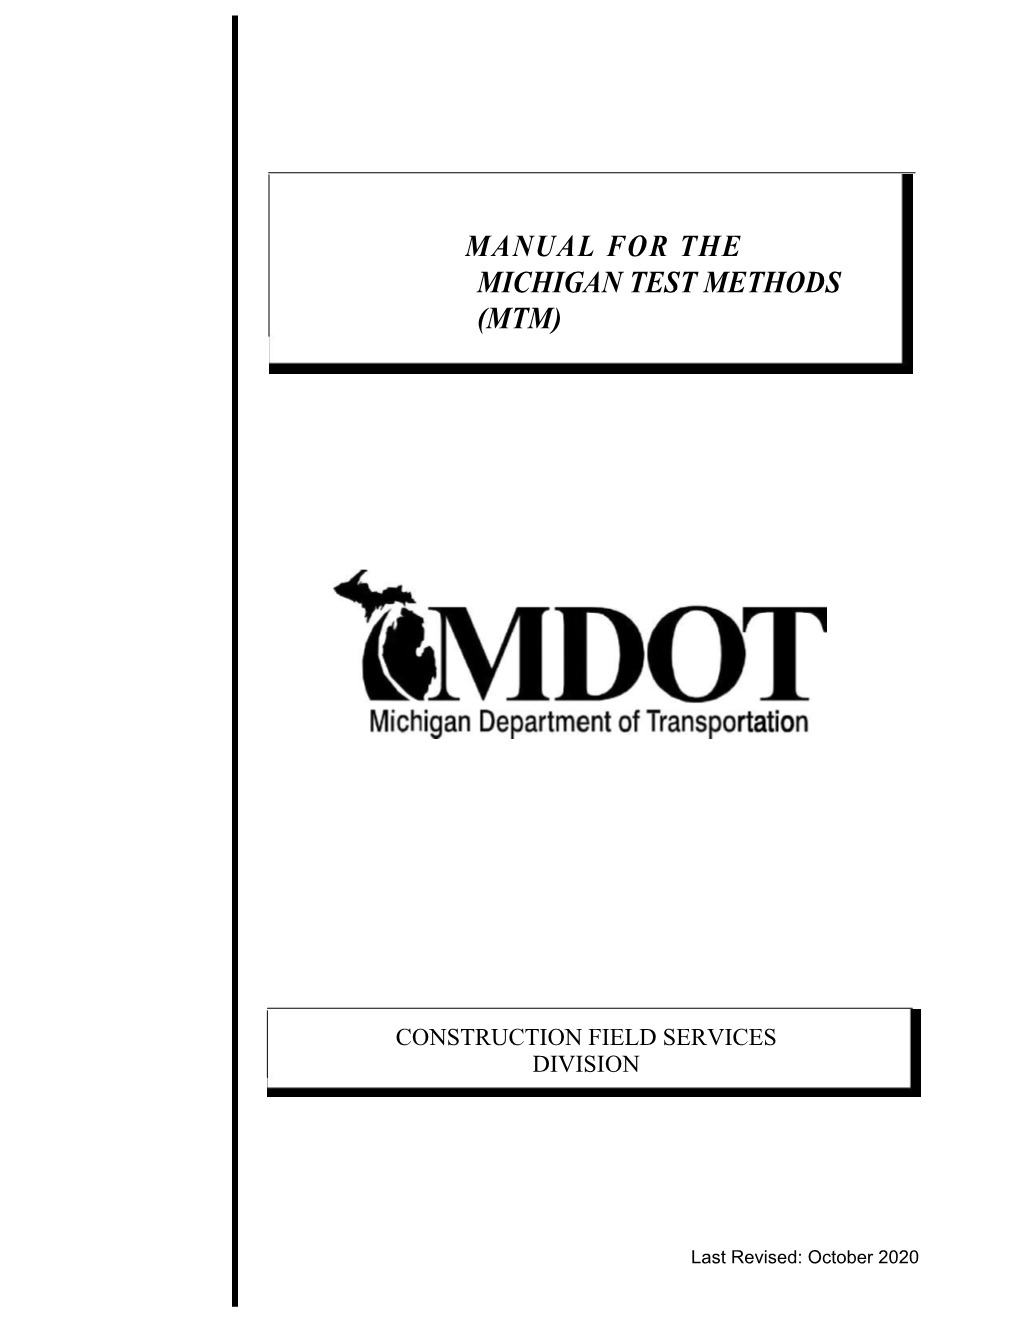 Manual for the Michigan Test Methods (Mtm)